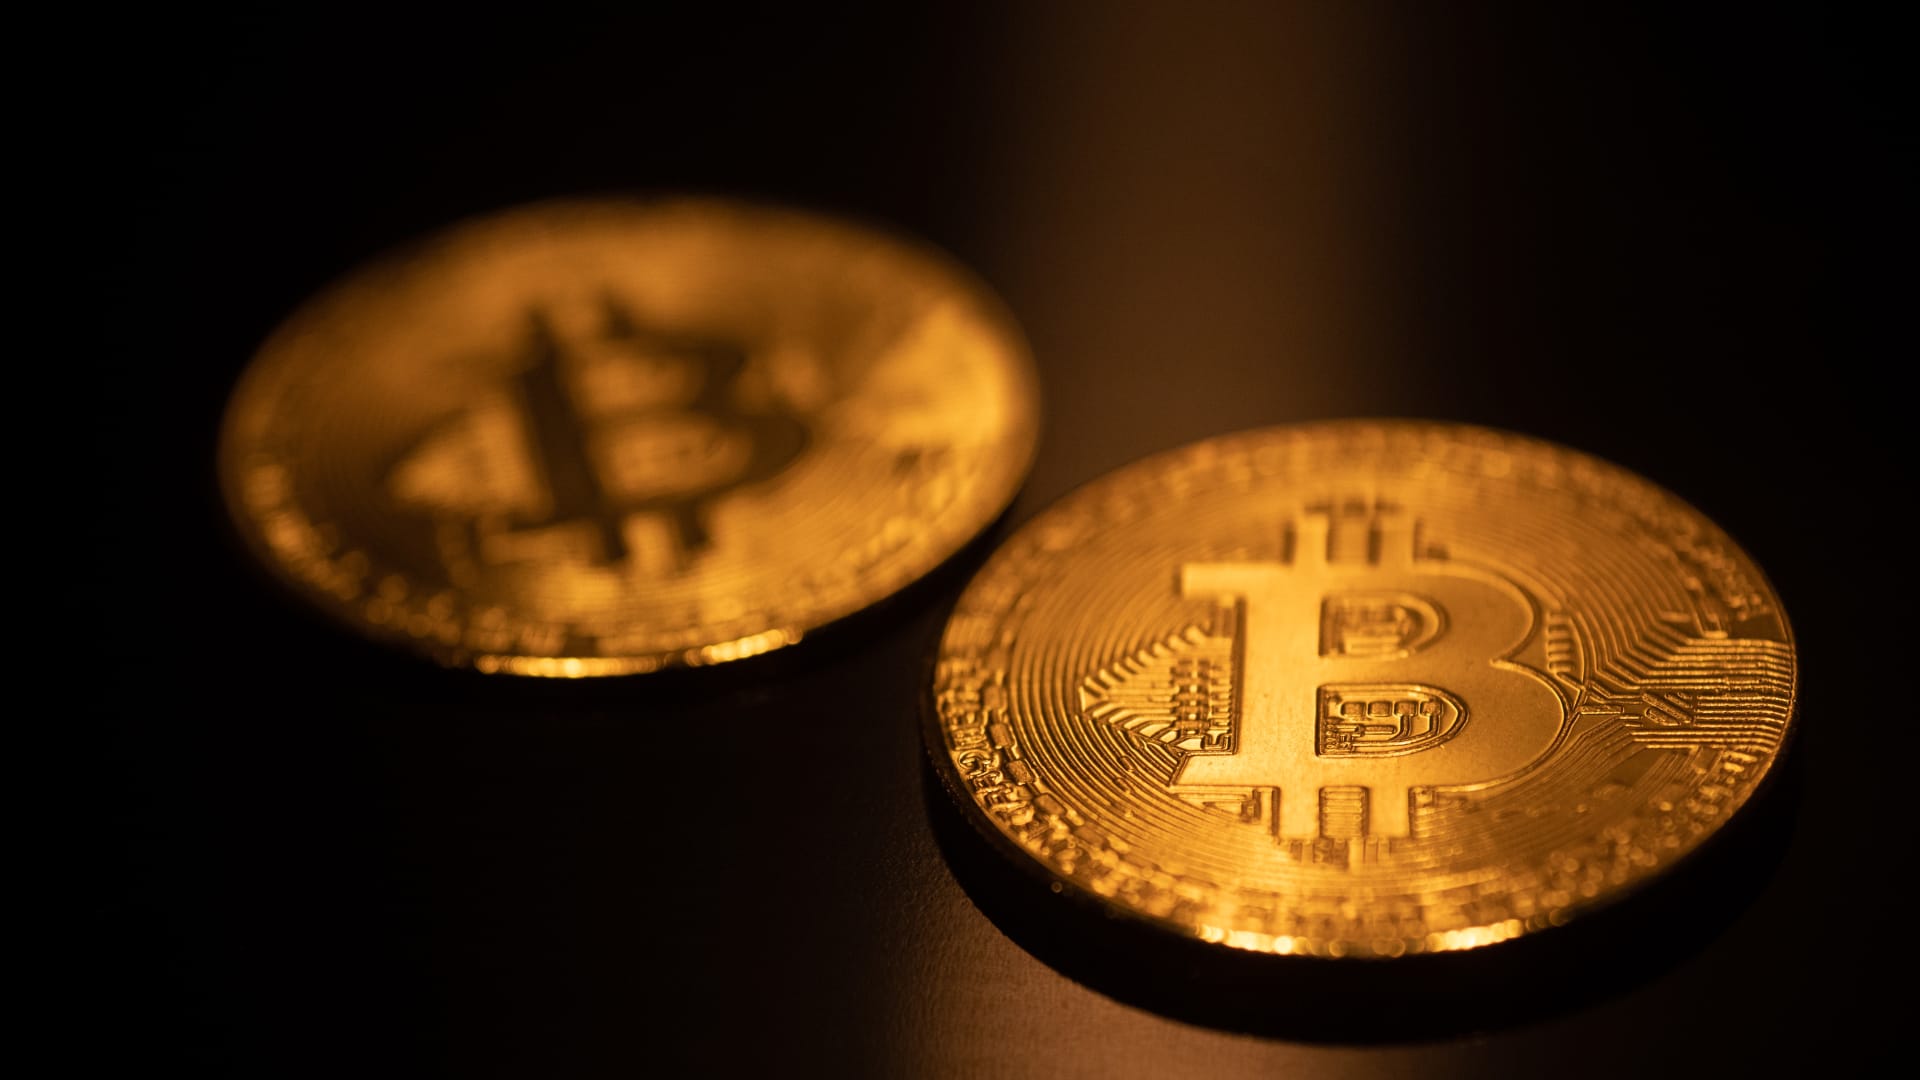 Bitcoin tops $25,000 for the first time since June before slipping